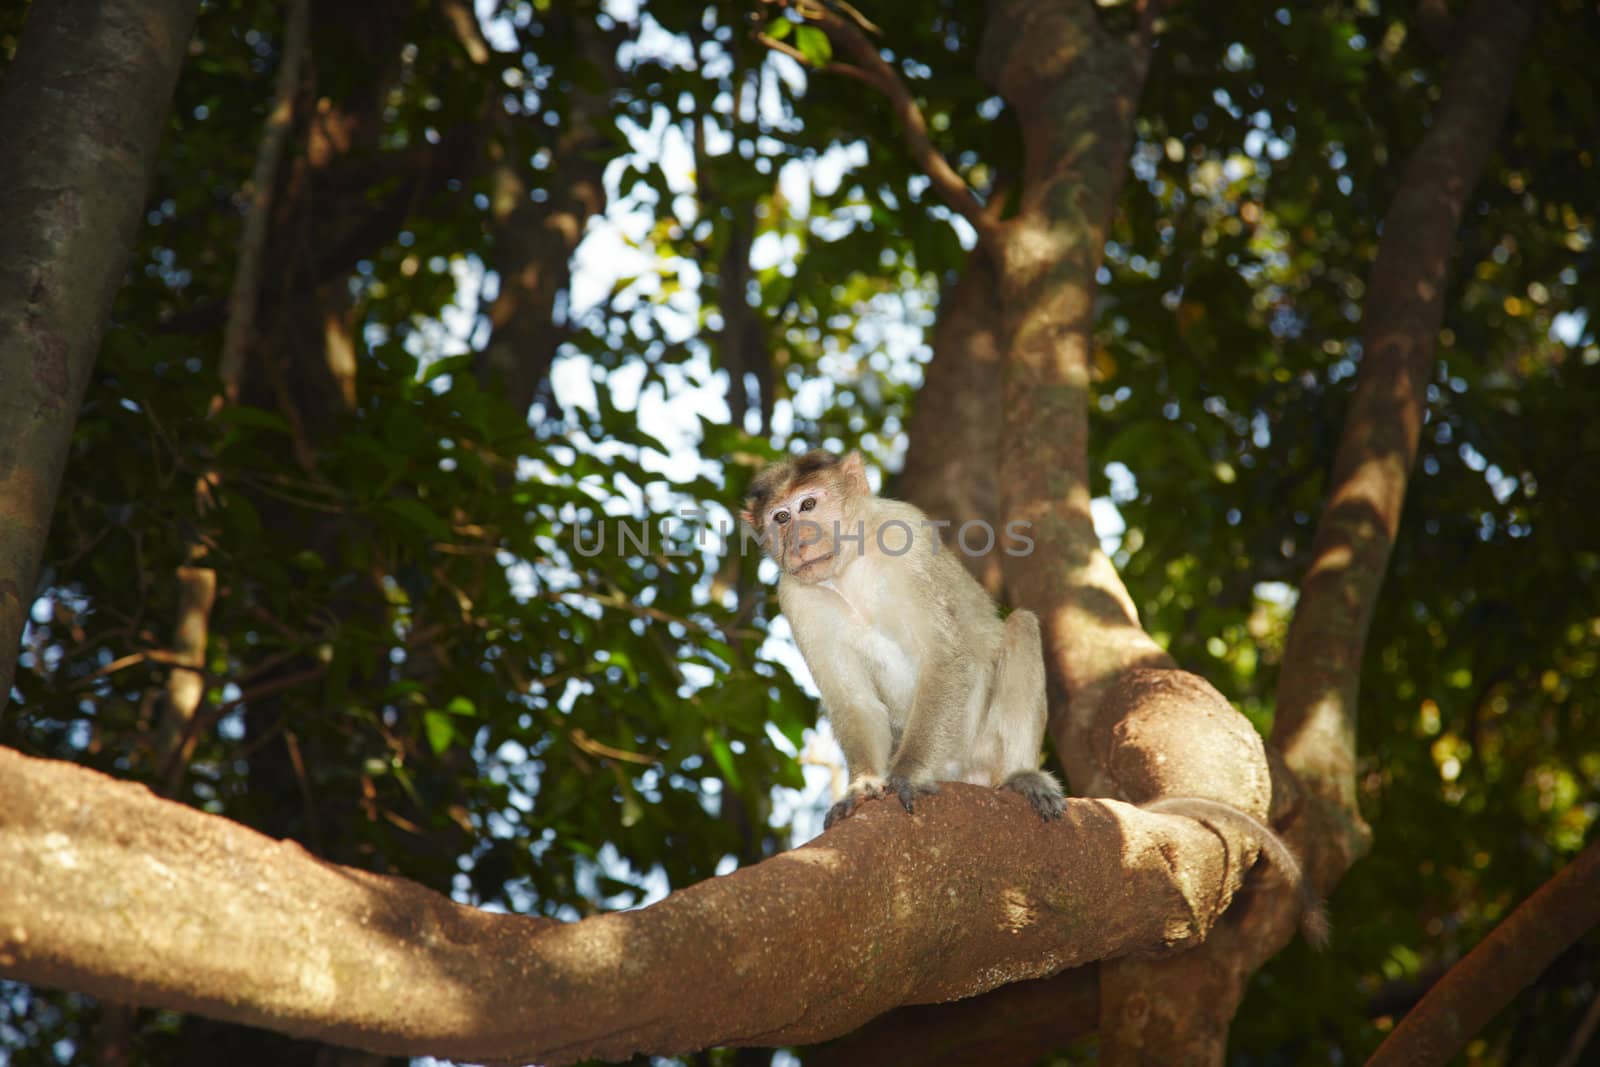 Wild monkey on the tree in Indian jungles. Goa. Natural light and colors